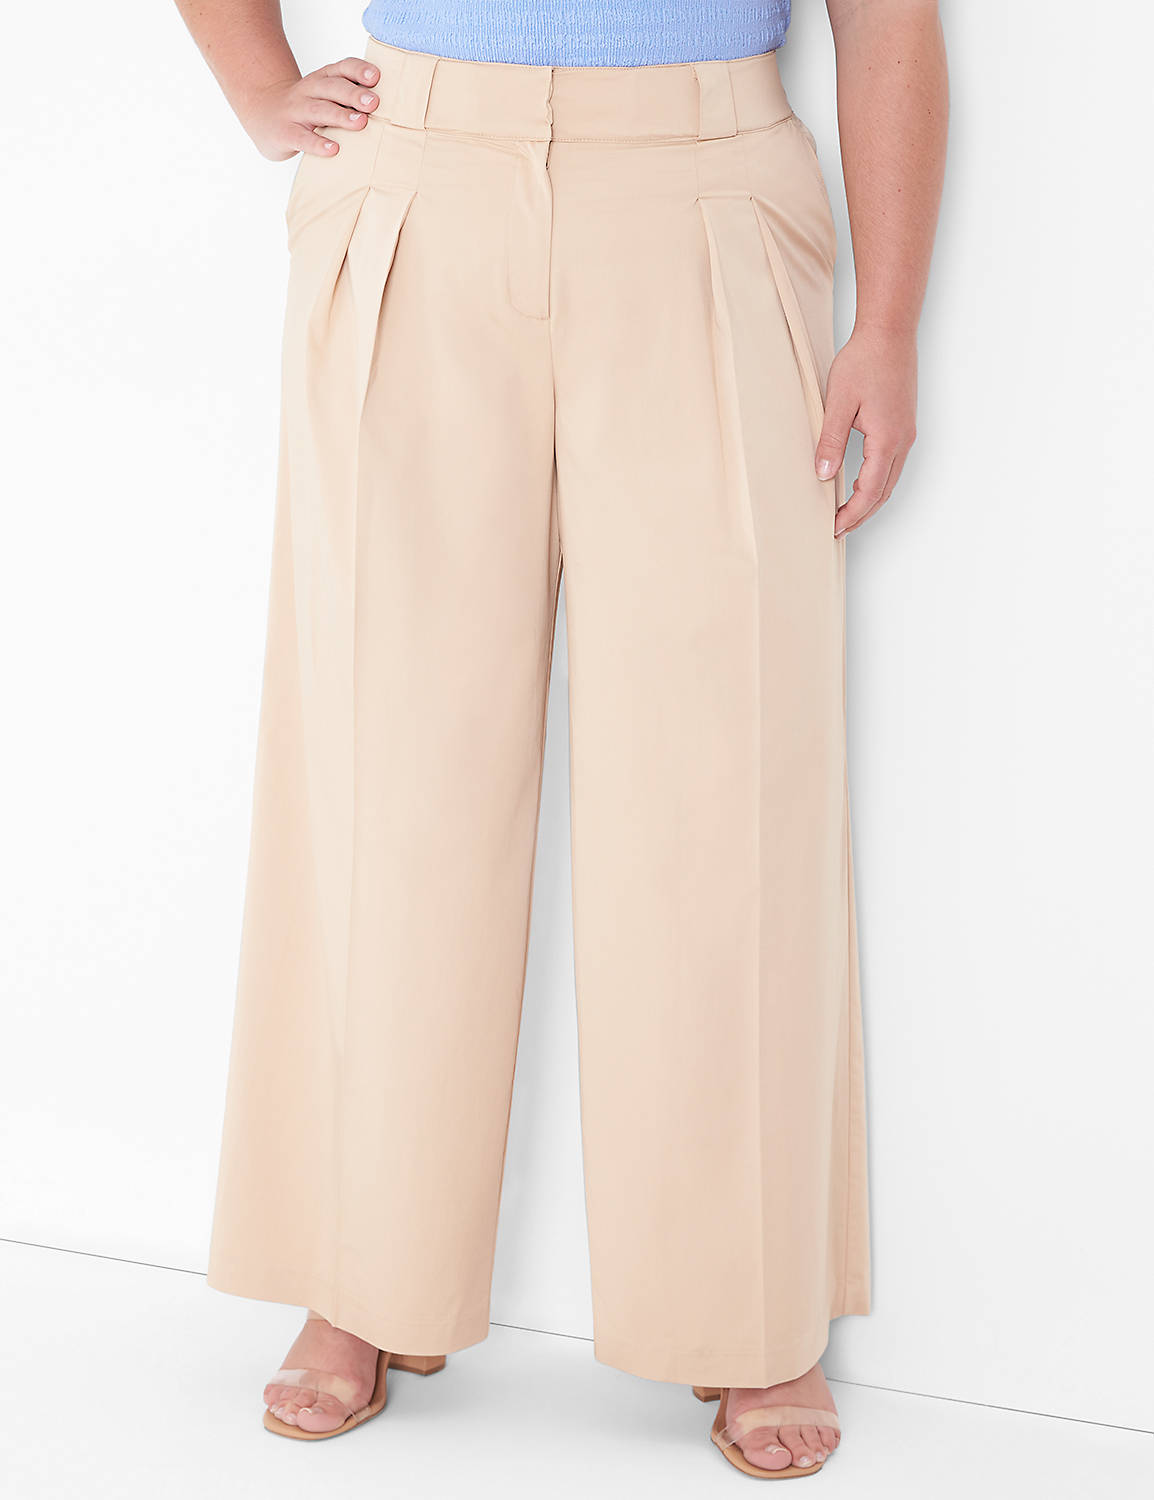 The Tailored Wideleg 1136652 Product Image 1